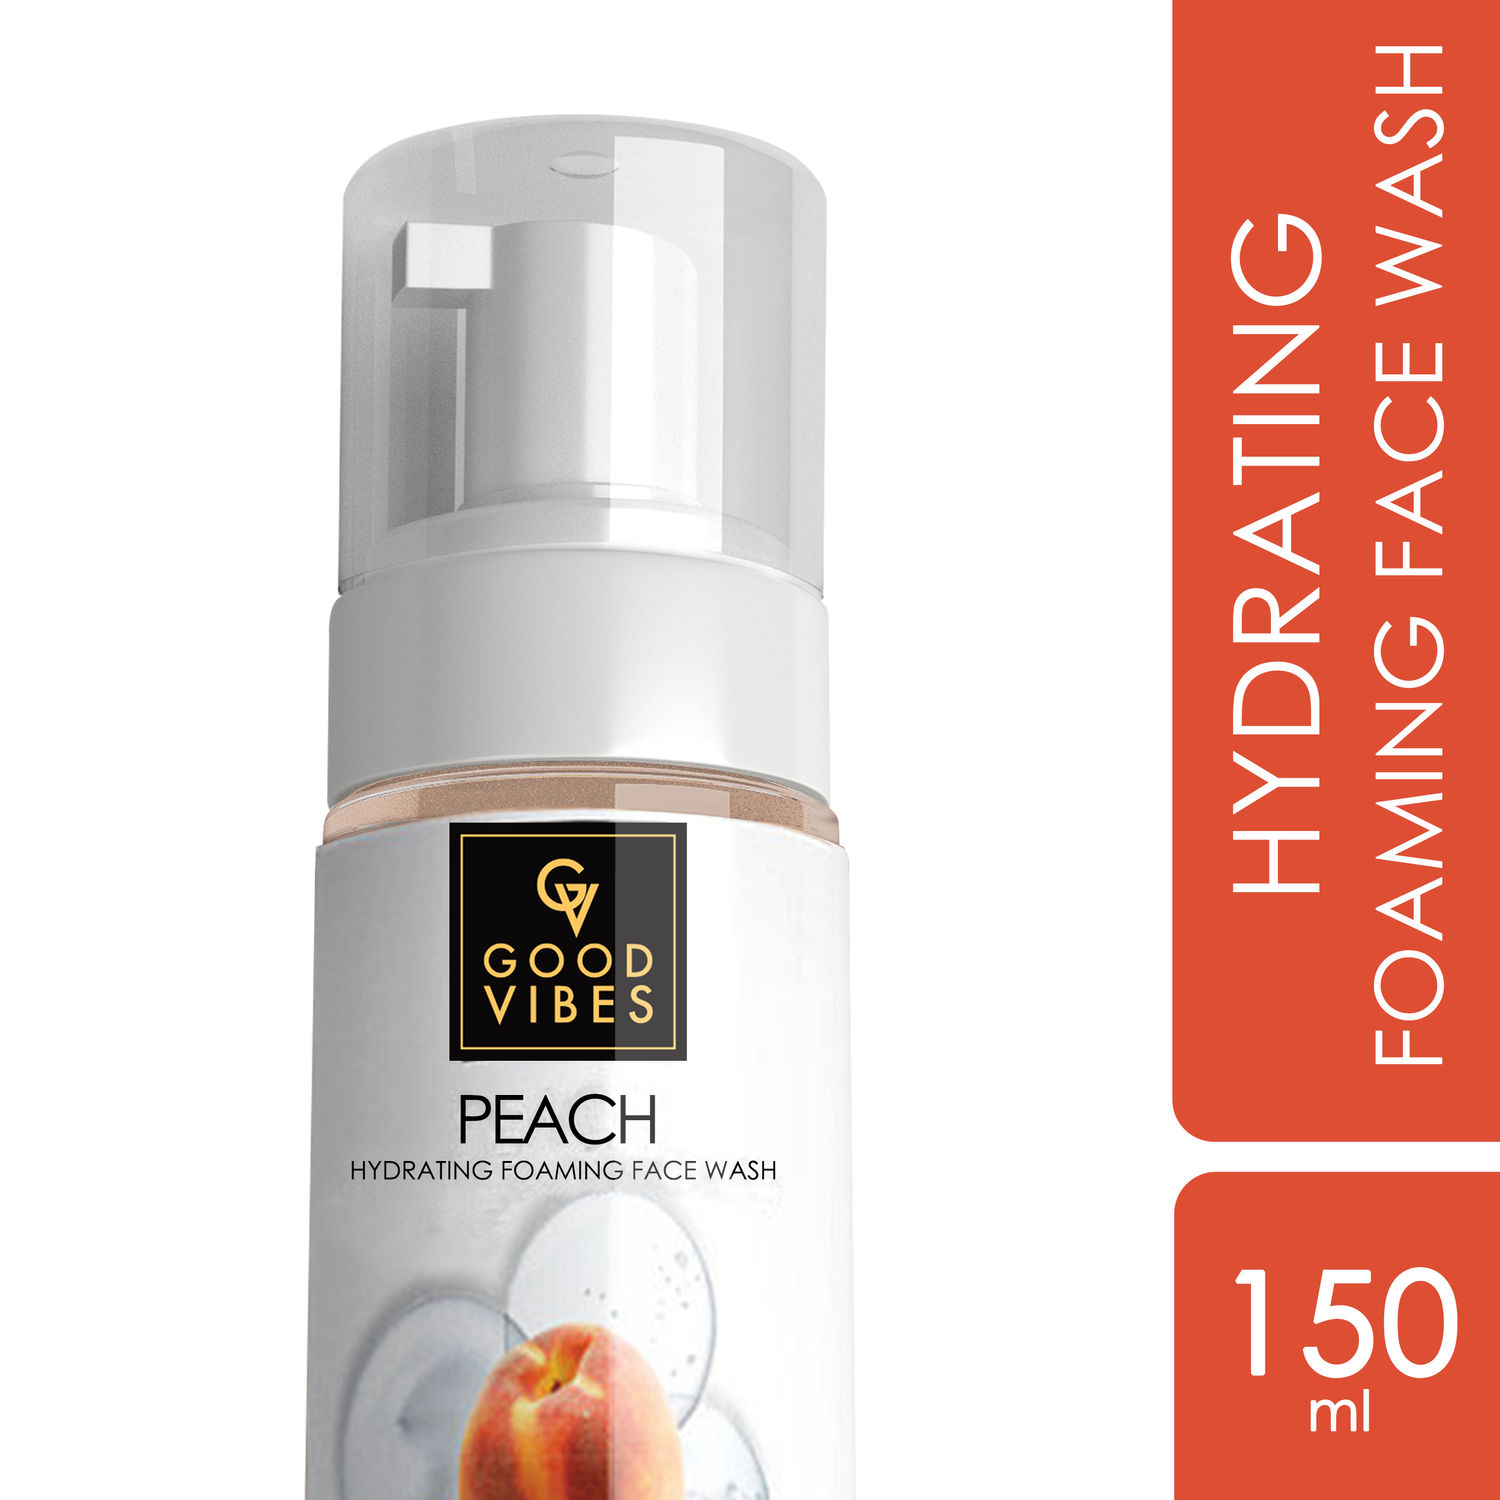 Buy Good Vibes Hydrating Foaming Face Wash - Peach (150ml) - Purplle